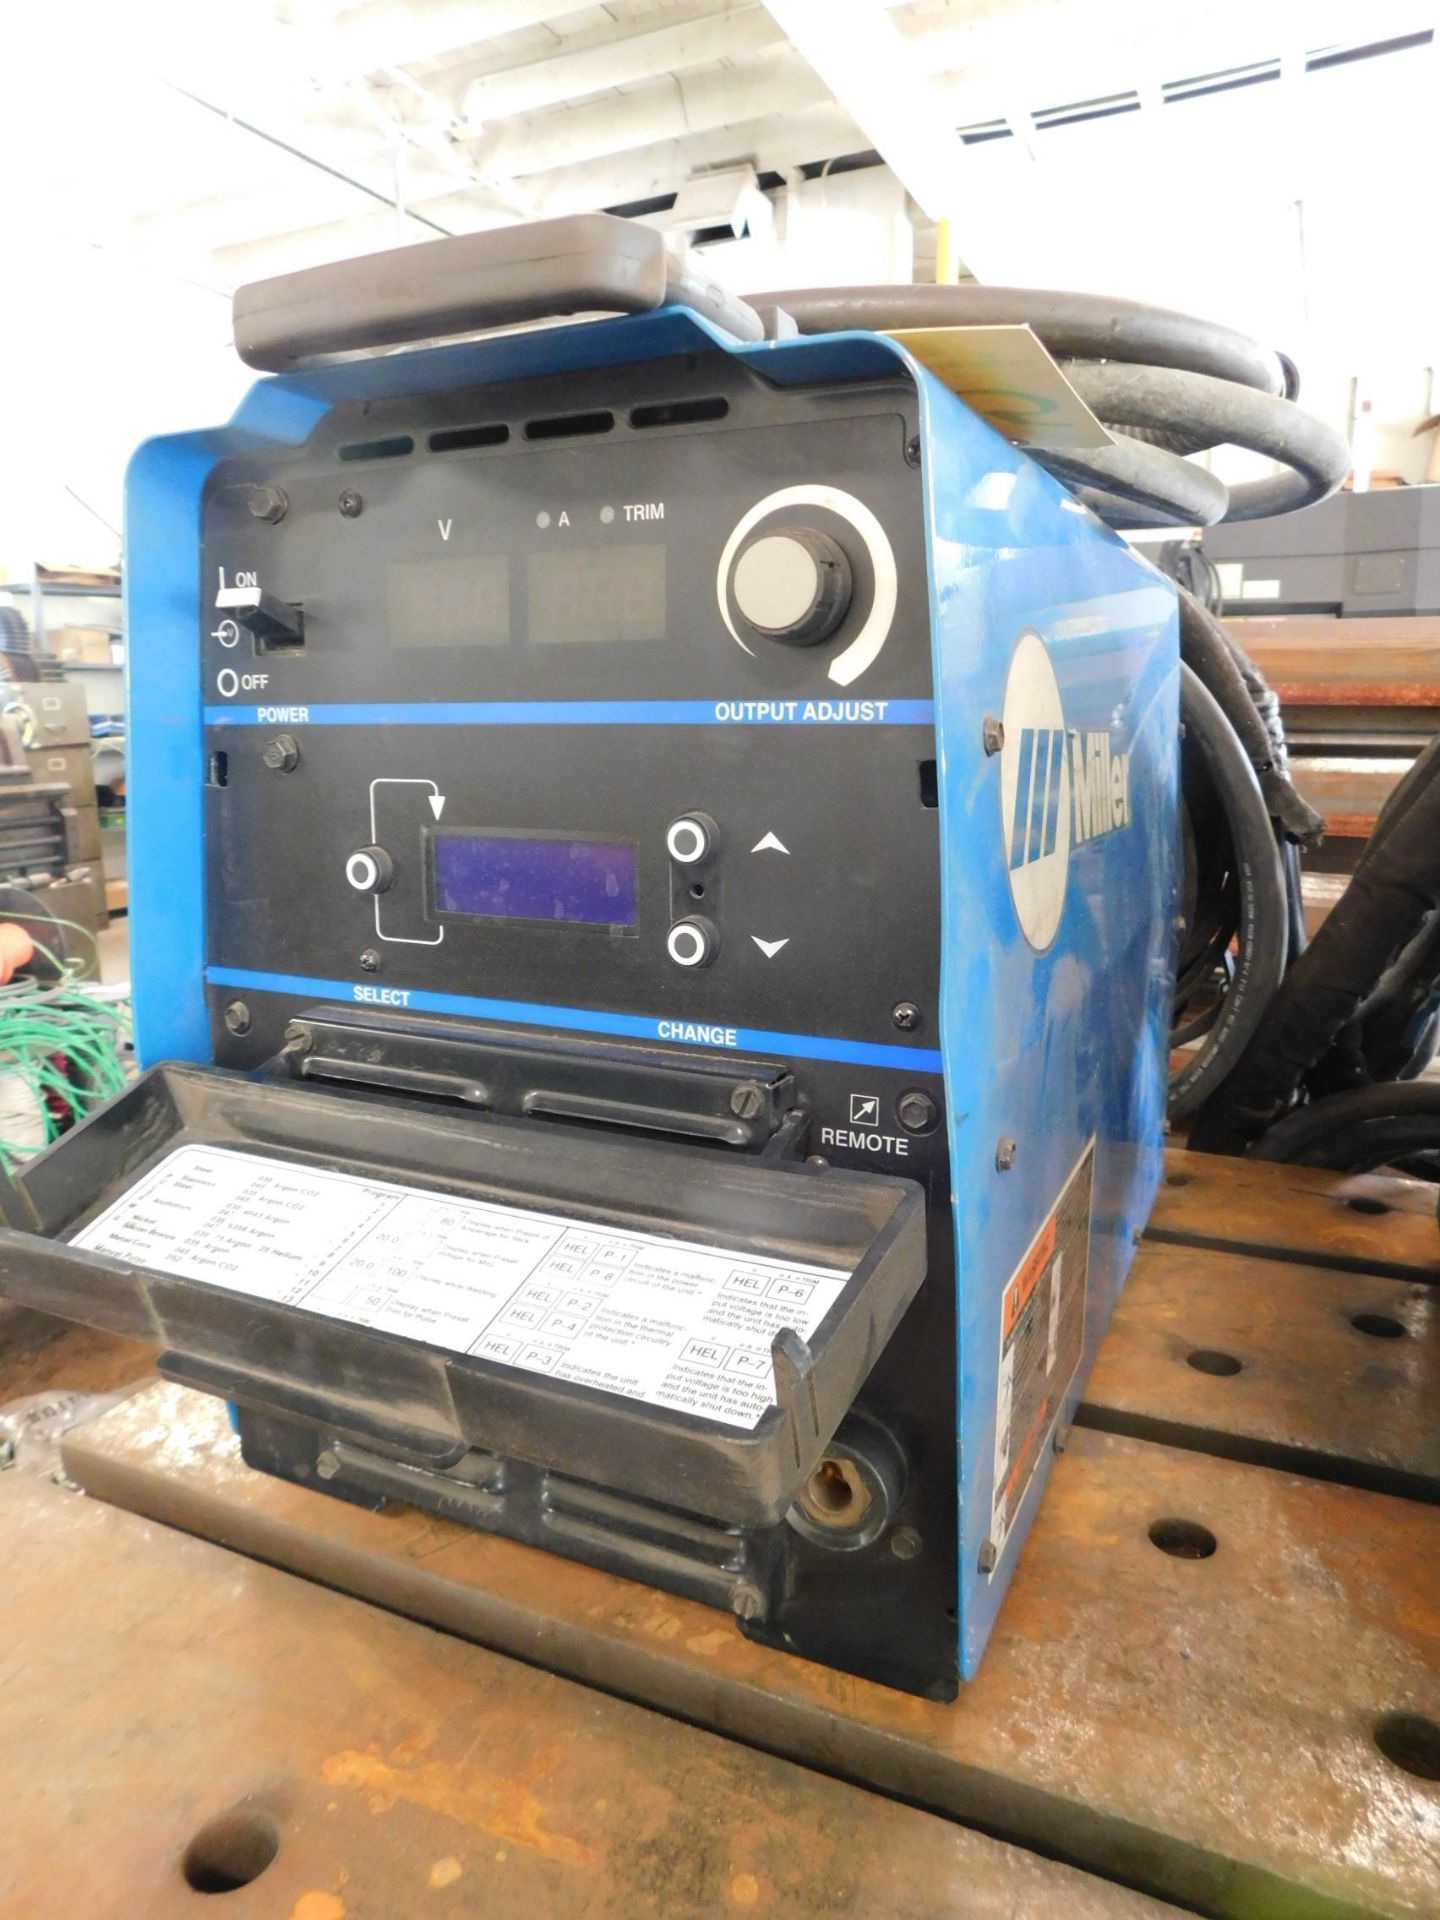 Miller Invision 354MP DC Inverter Arc Welder, s/n LG160263A, 1 or 3 Phase, 230/460 Vo.ts